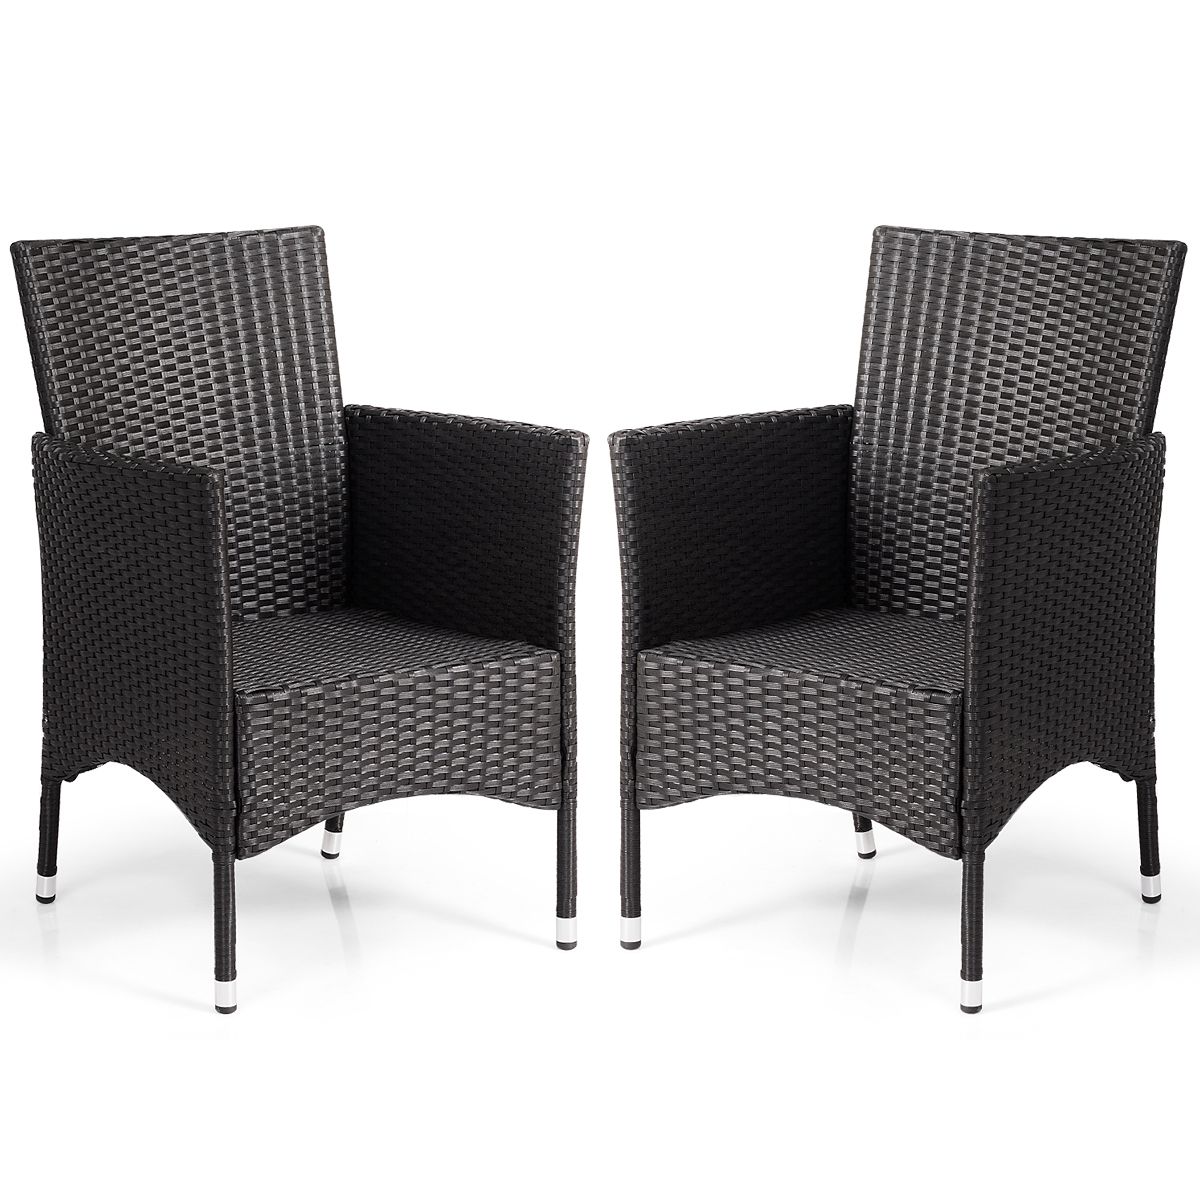 Giantex 2Pc Patio Rattan Wicker Dining Chairs Set With Cushions Black Regarding Black Outdoor Dining Chairs (View 11 of 15)